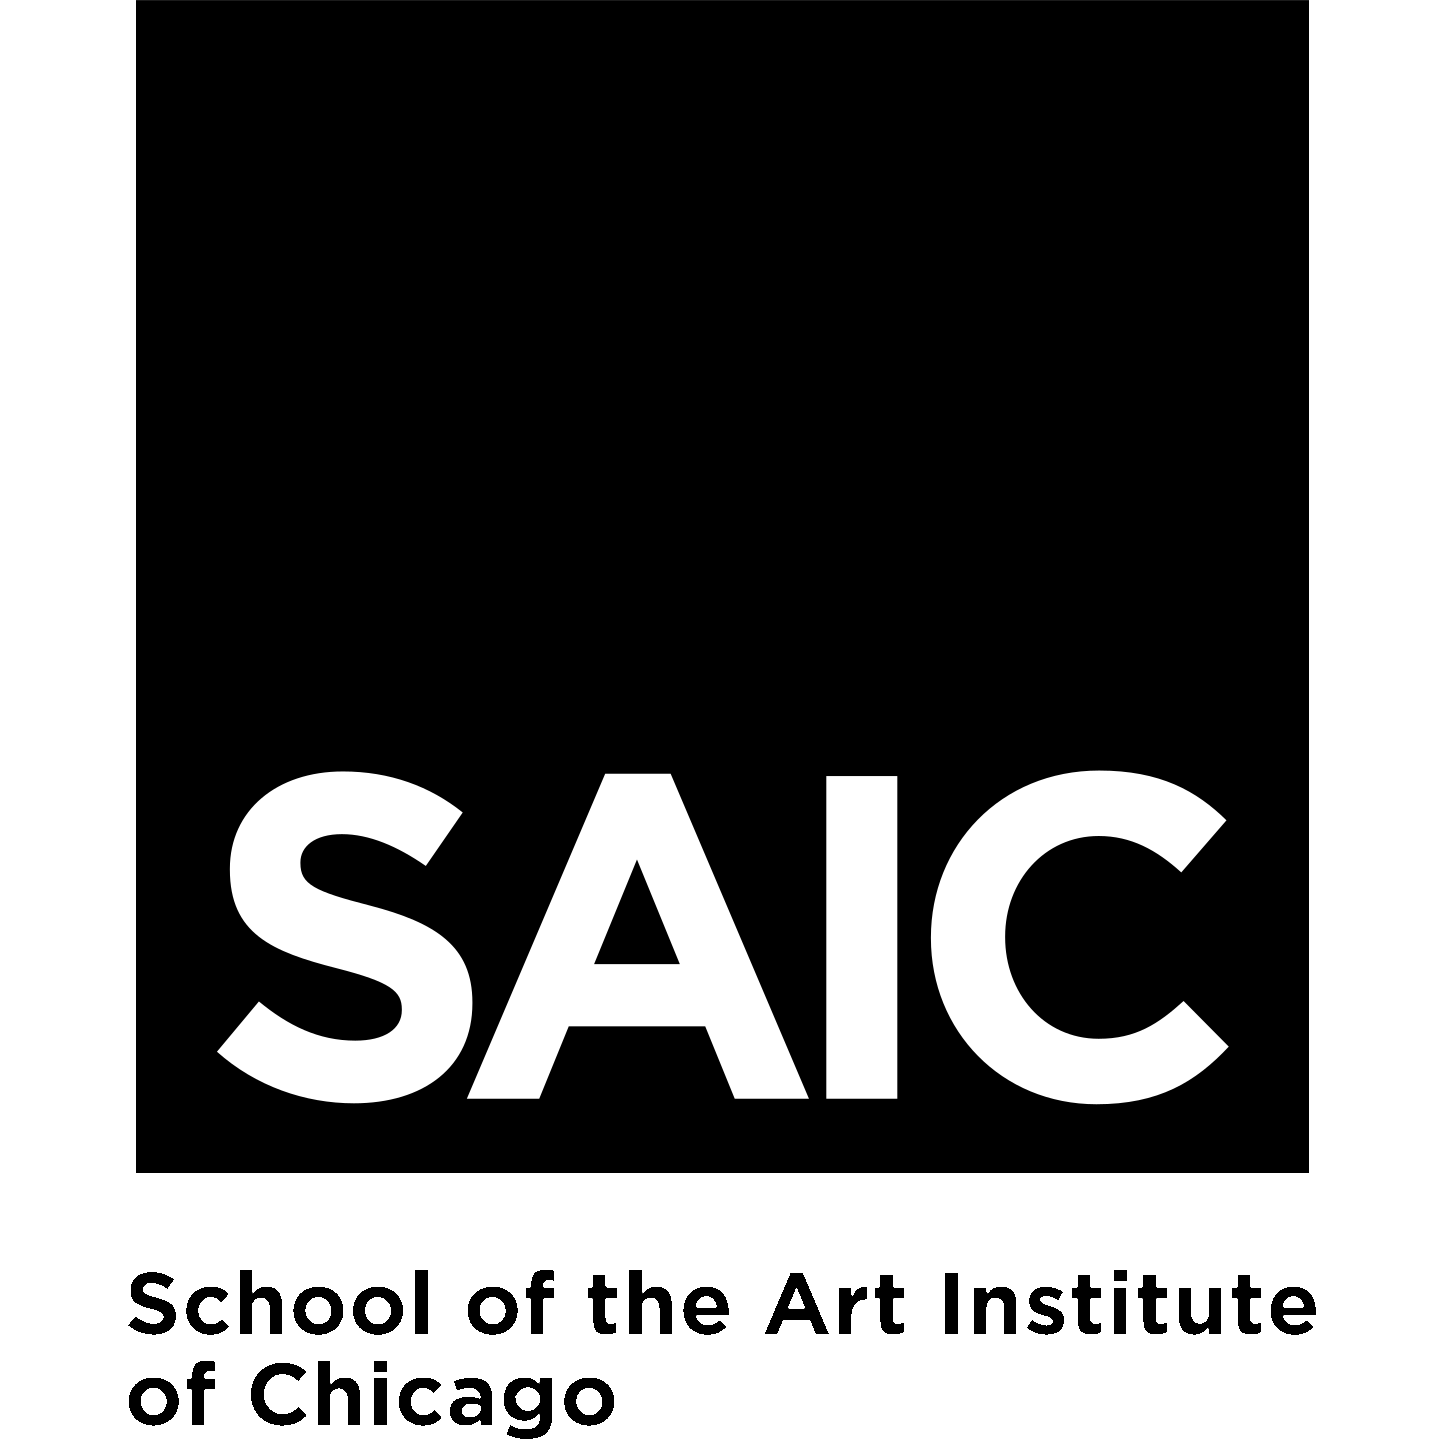 The School of the Art Institute Chicago logo with initials S A I C.